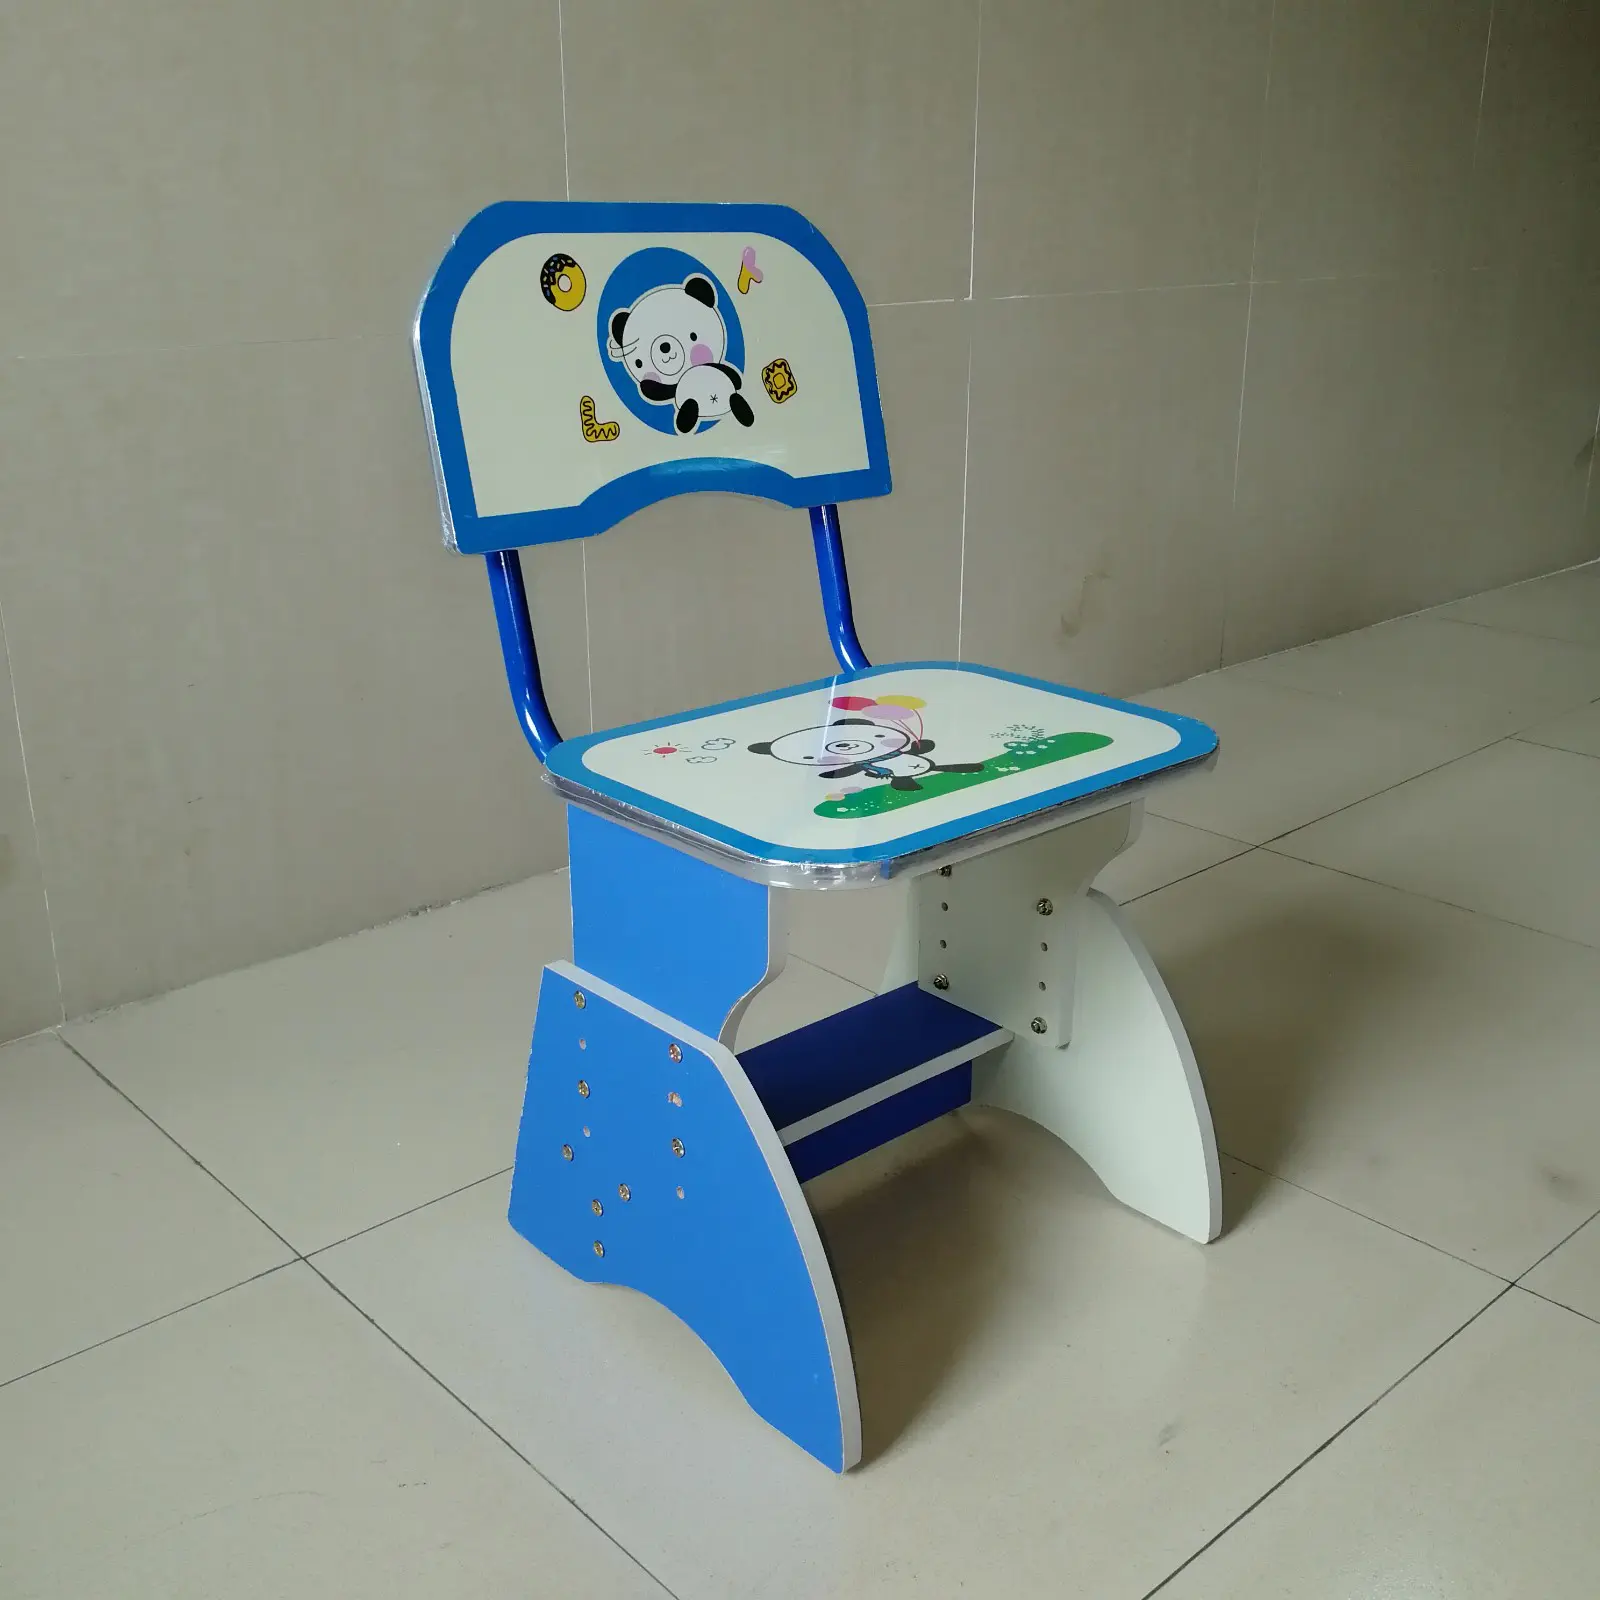 Aoqi excellent youth desk and chair set inquire now for household